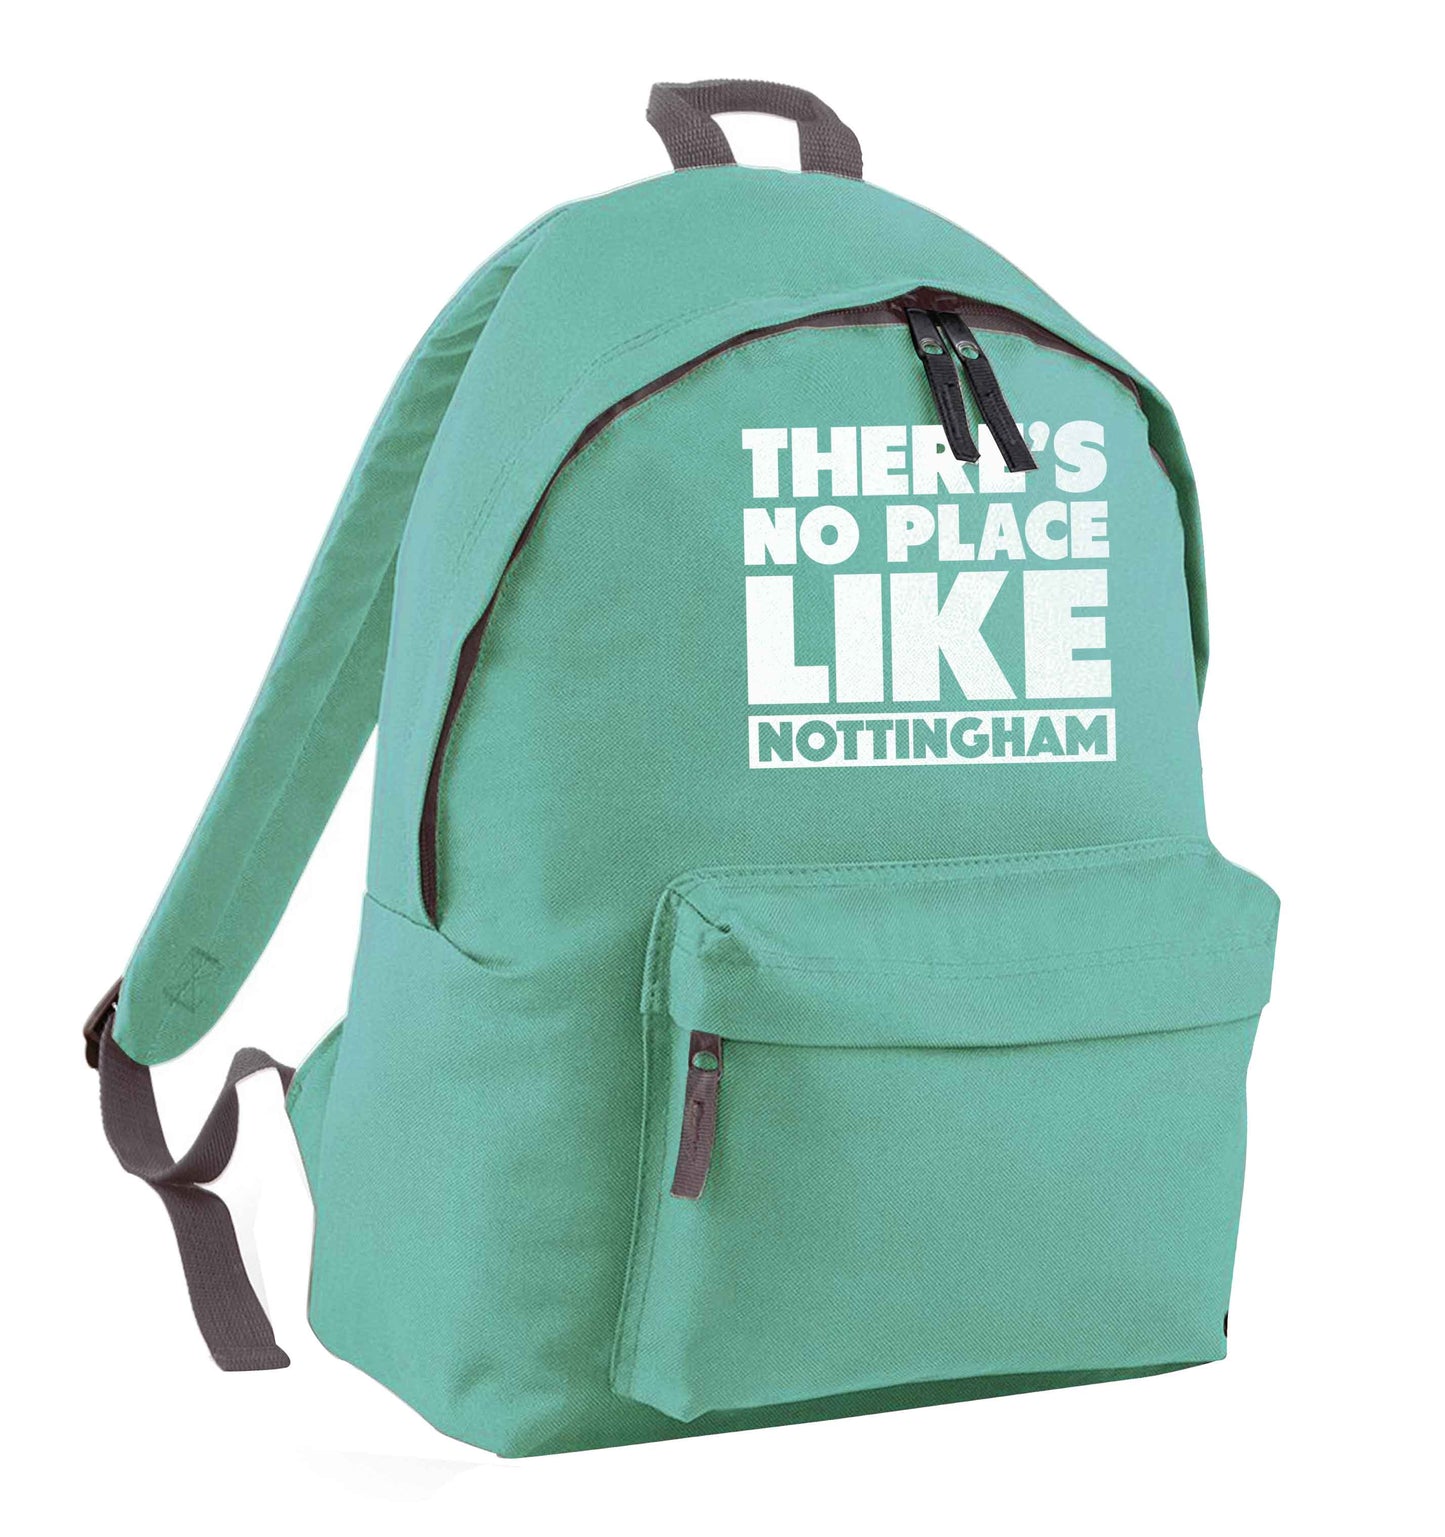 There's no place like Nottingham mint adults backpack